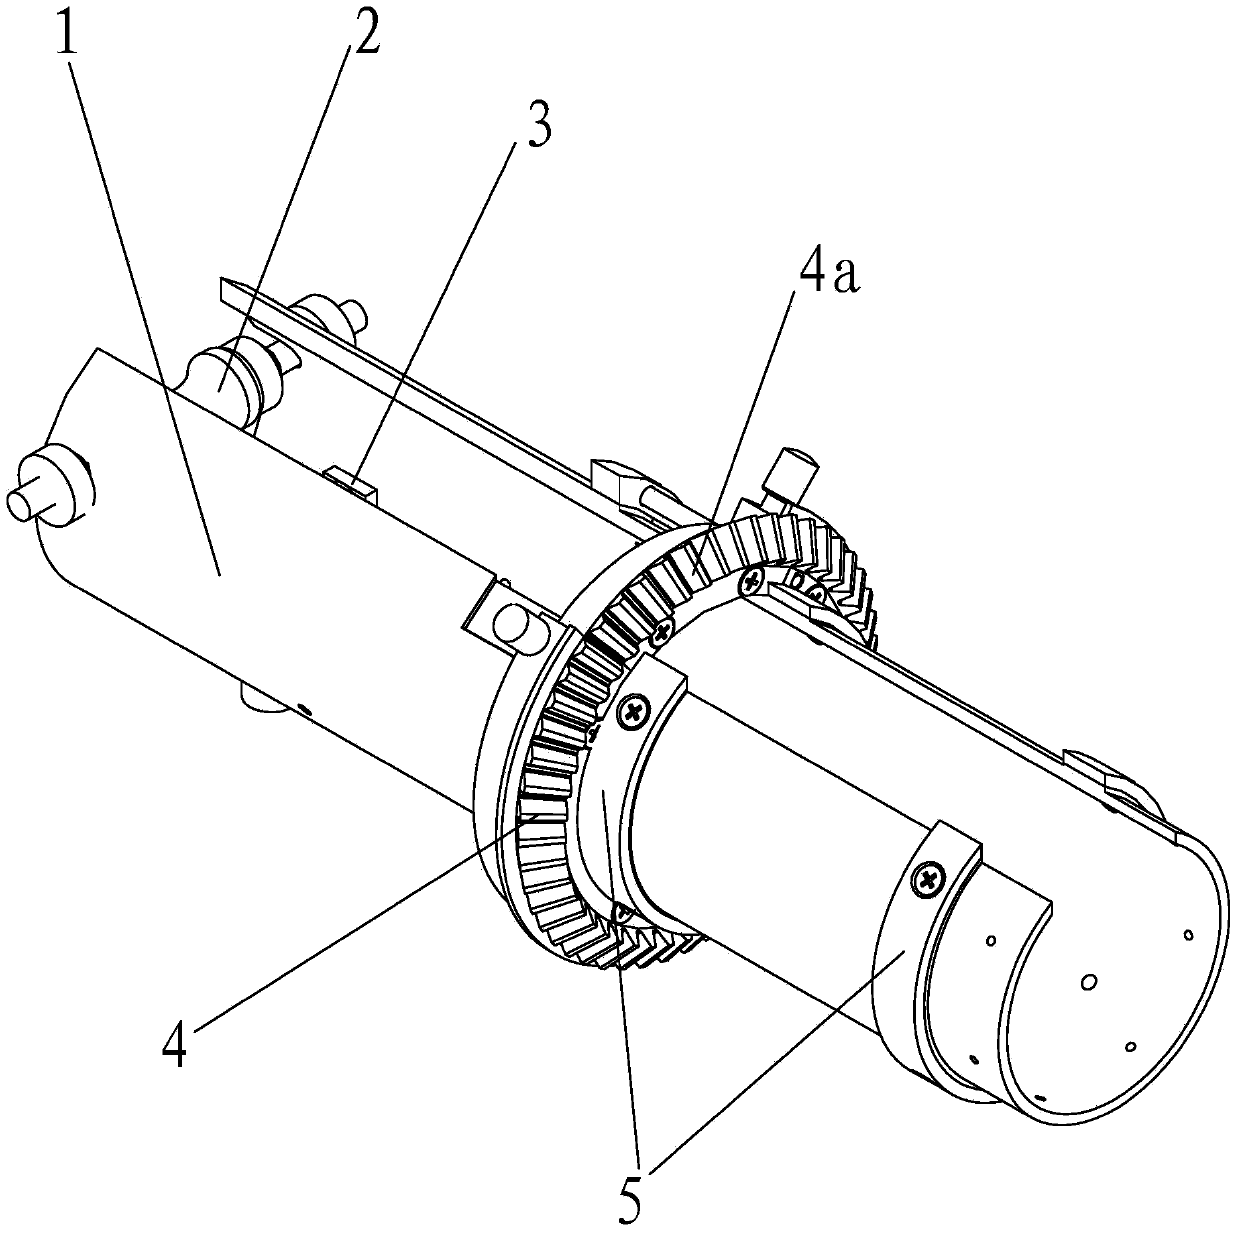 Portable winding device